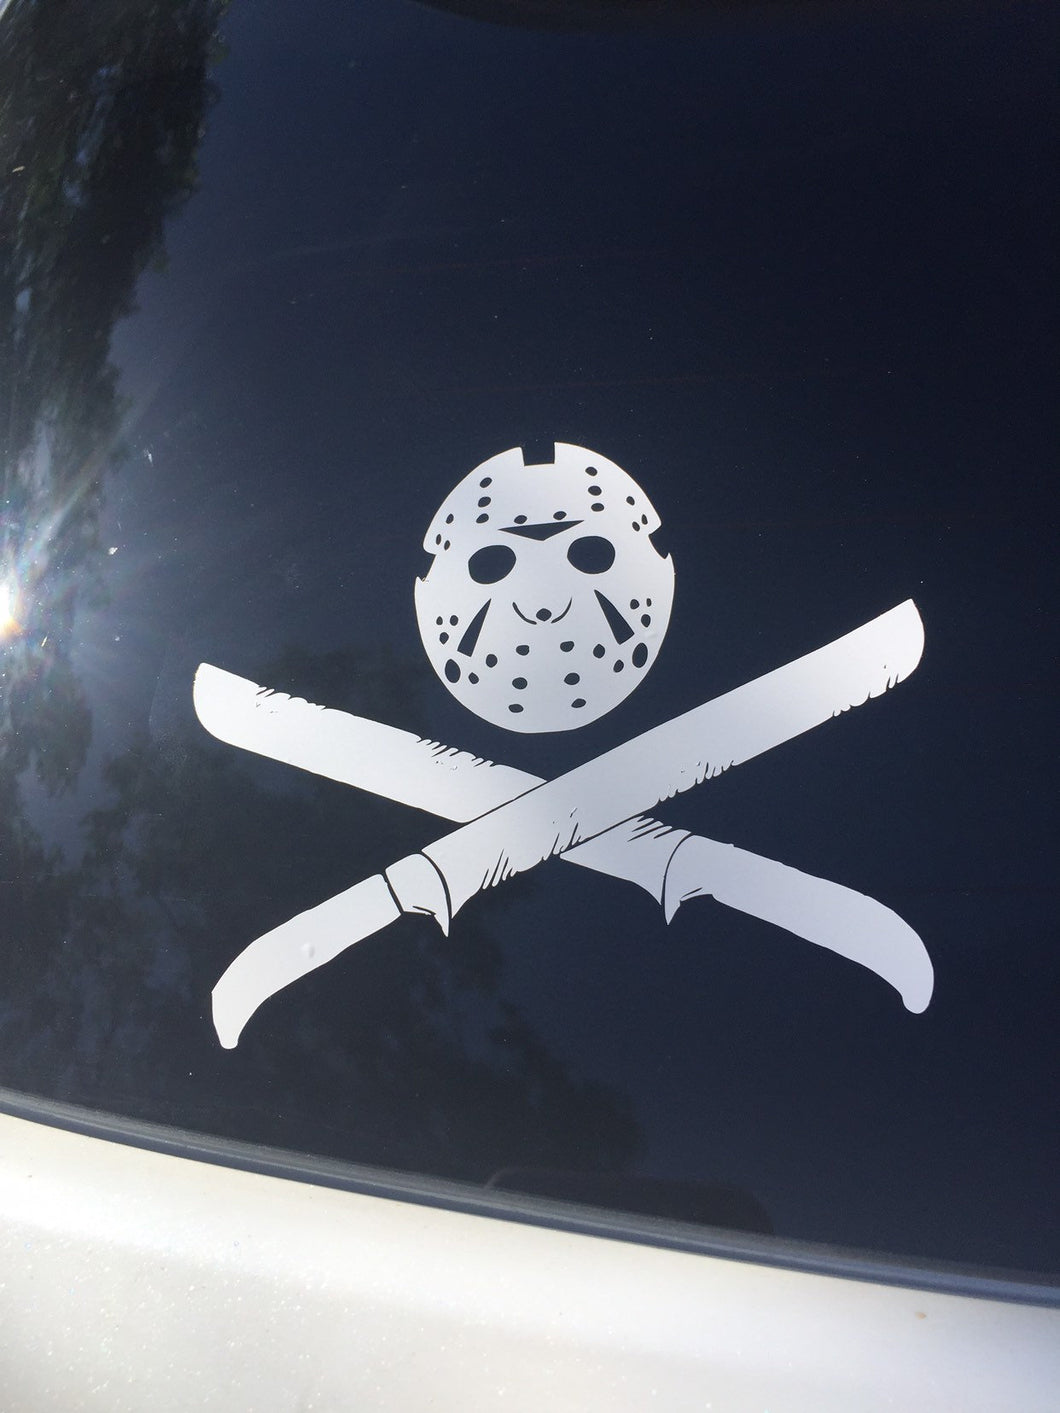 Friday the 13th car decal